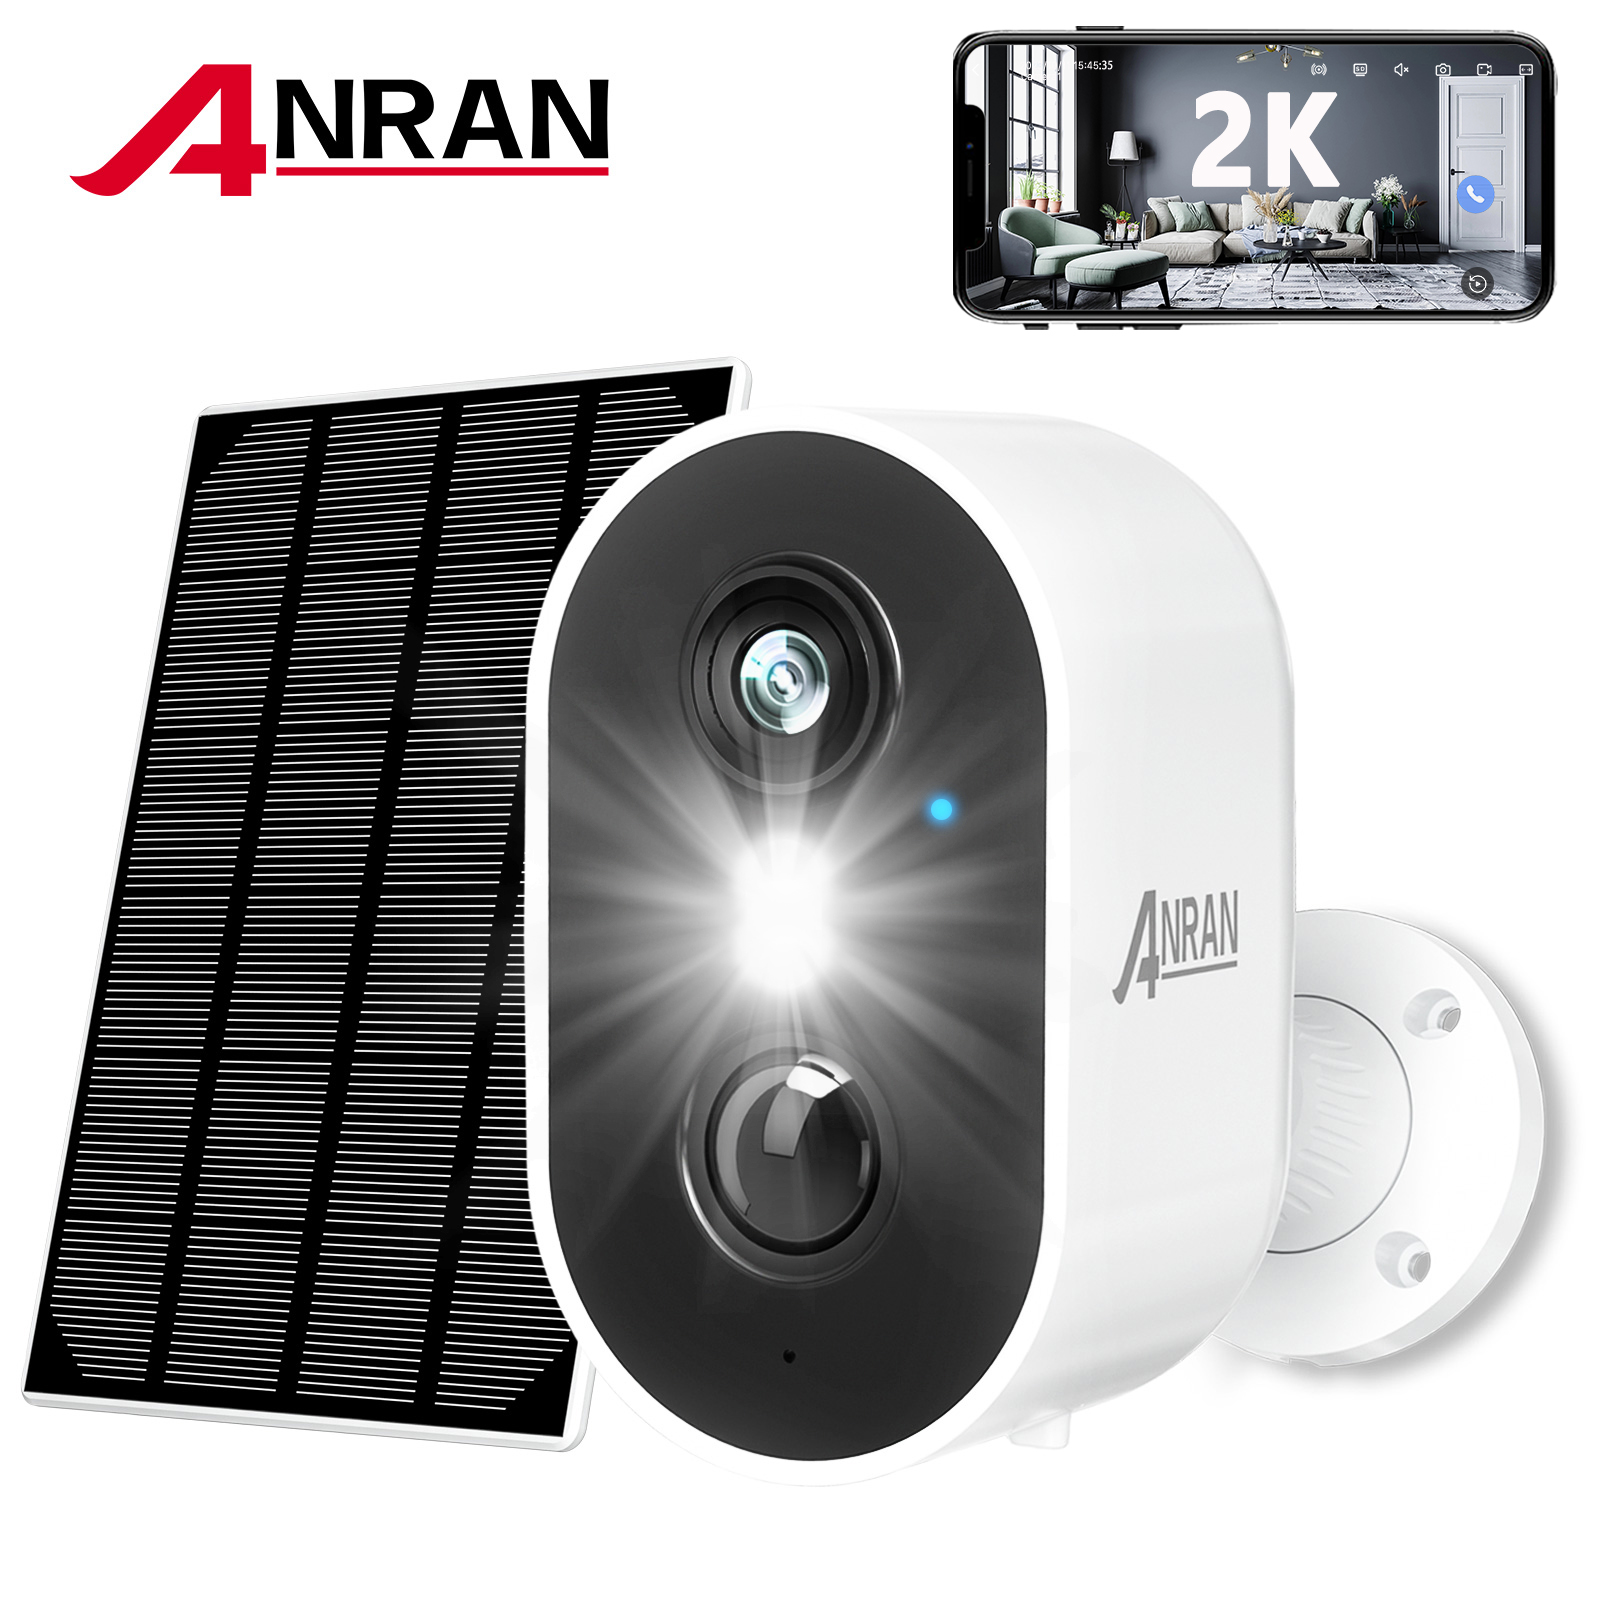 ANRAN 2K Wireless Outdoor Solar Security Camera with Spotlight, Waterproof PIR Detection, 2.4Ghz Wi-Fi, Rechargeable Battery Powered Home Surveillance Camera with Color Night Vision, 2-Way Audio - image 1 of 10